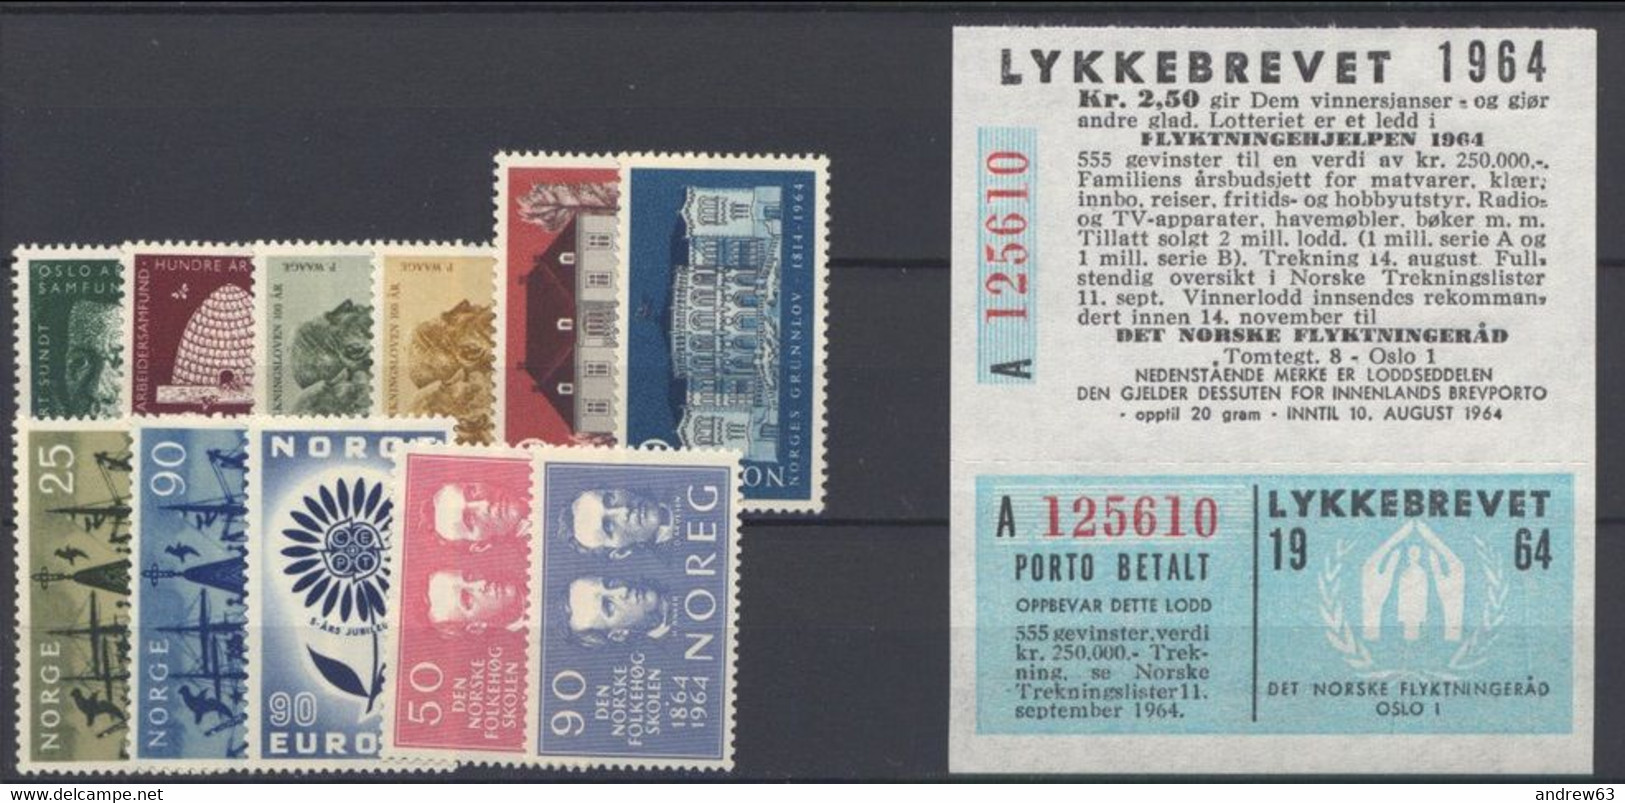 NORVEGIA - Norge - Norwegen - Norway - 1964 With Lykkebrevet - Annata Completa / Complete Year **/MNH VF - New - Années Complètes